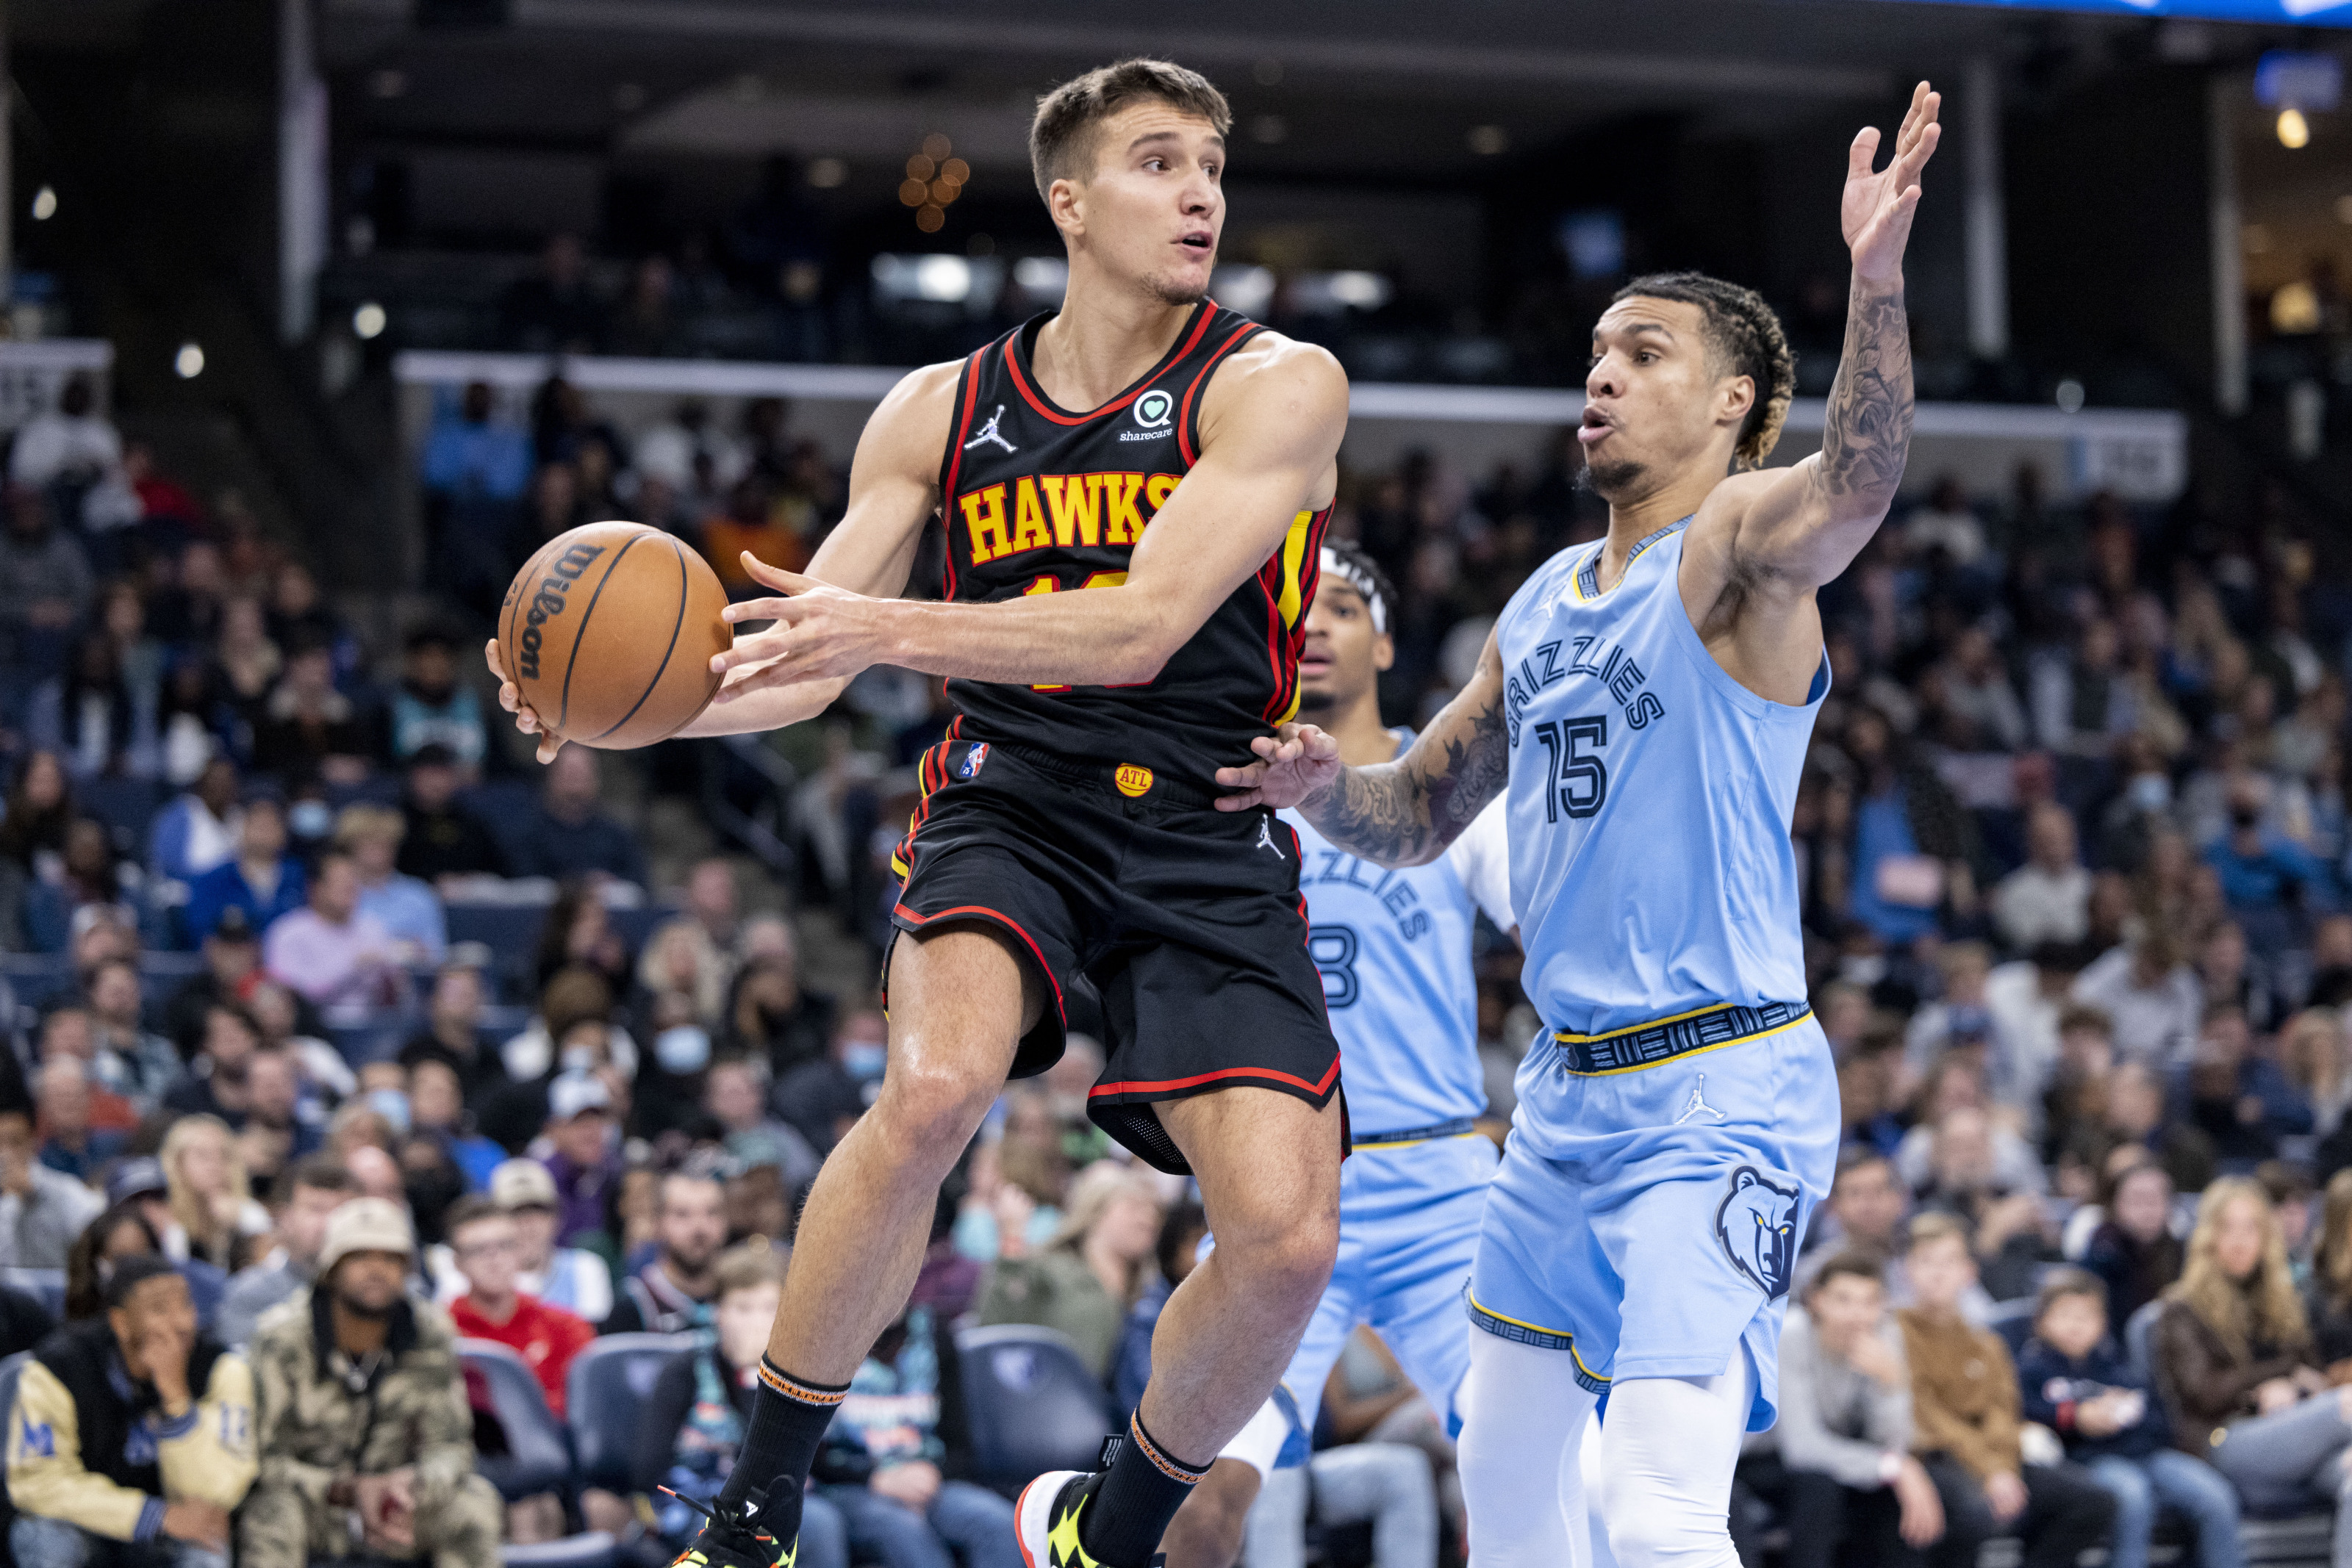 Hawks' Hunter to miss approximately 8 weeks after wrist surgery